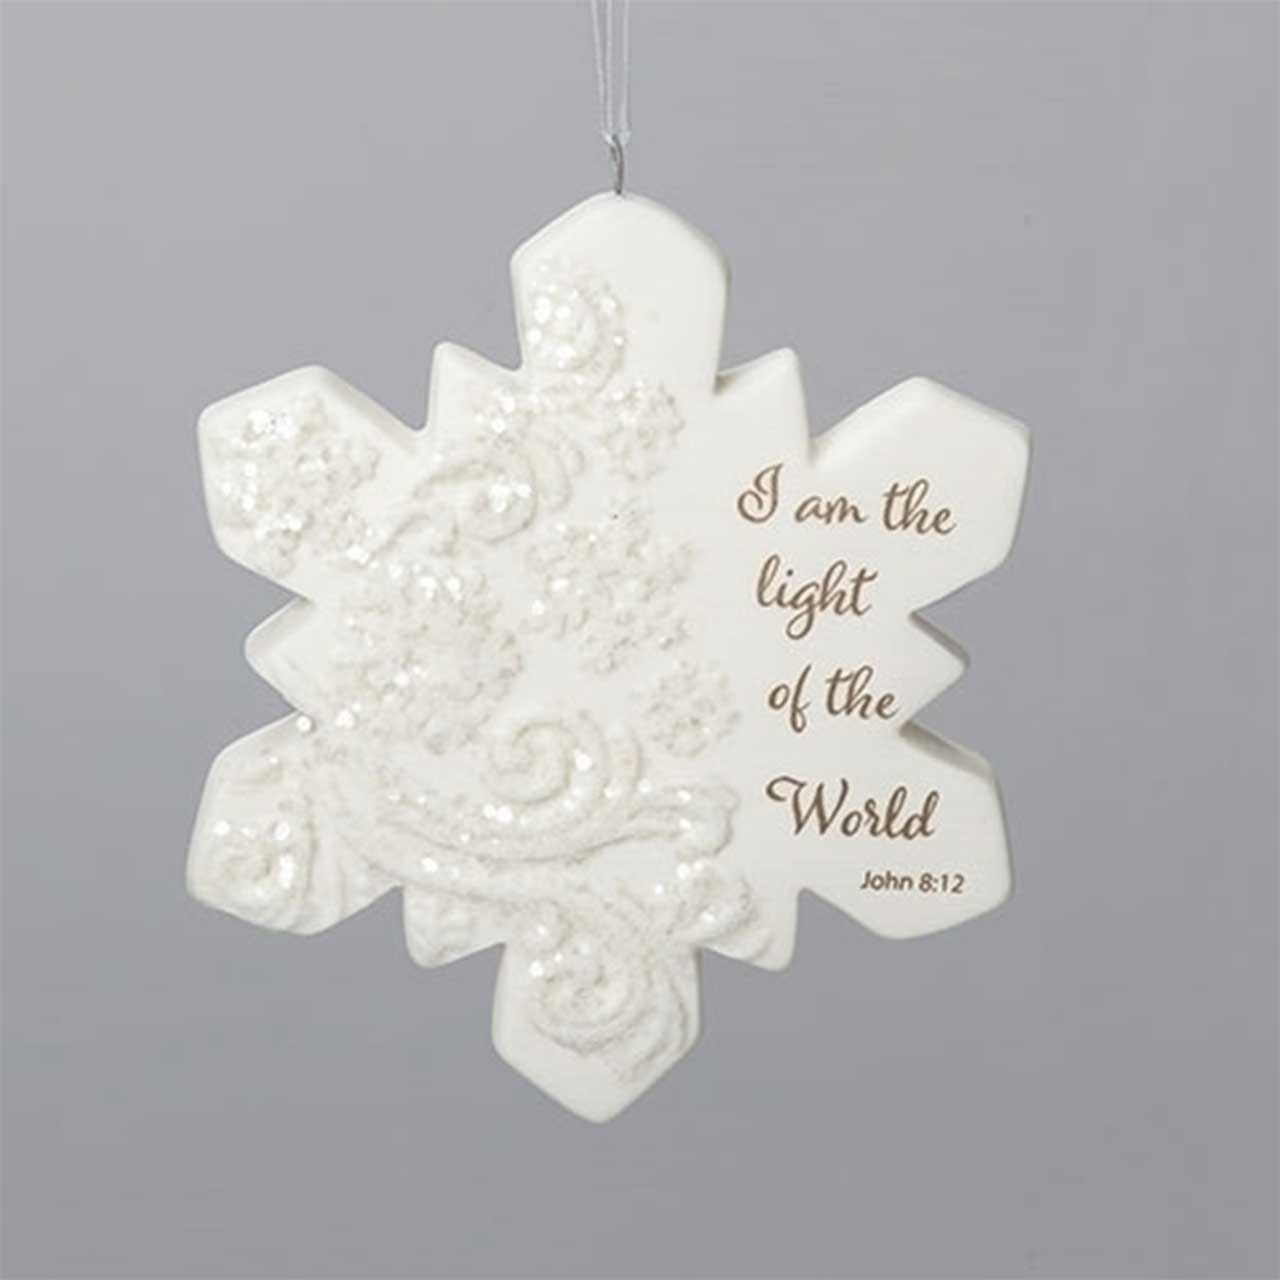 Snowflake Ornament with Scripture Verse